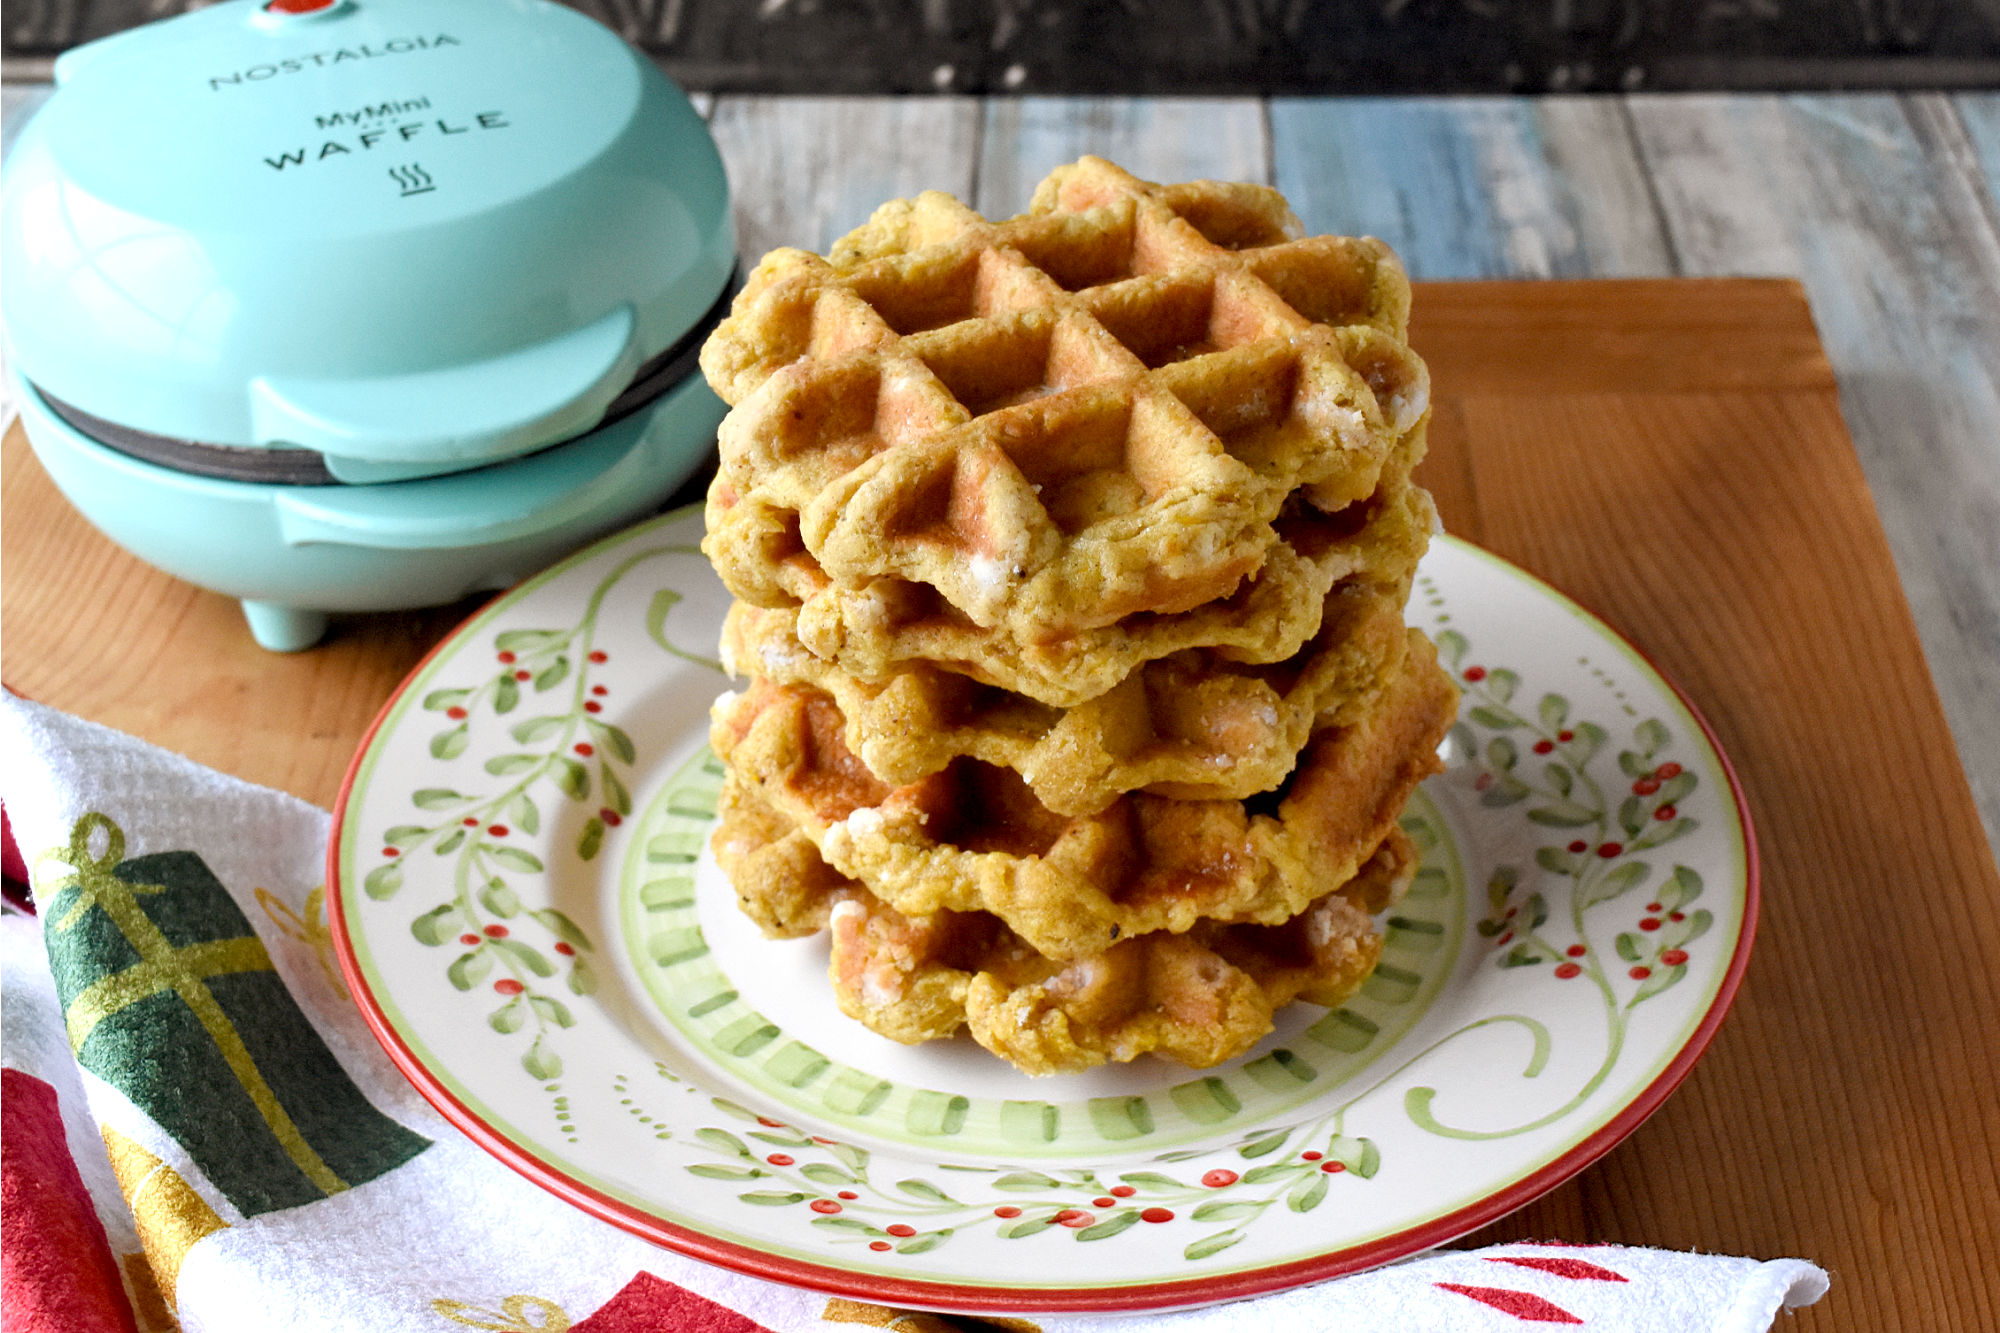 With an airy, fluffy center and a crispy caramelized crust, you will fall in love with these quick and easy Pumpkin Liége Waffles! #PumpkinLiégeWaffles #FallFlavors #AutumnEats #PumpkinSweets #YummyWaffles #FallFoodies #LiégeWaffleLove #WaffleLove #FoodieFavorites
